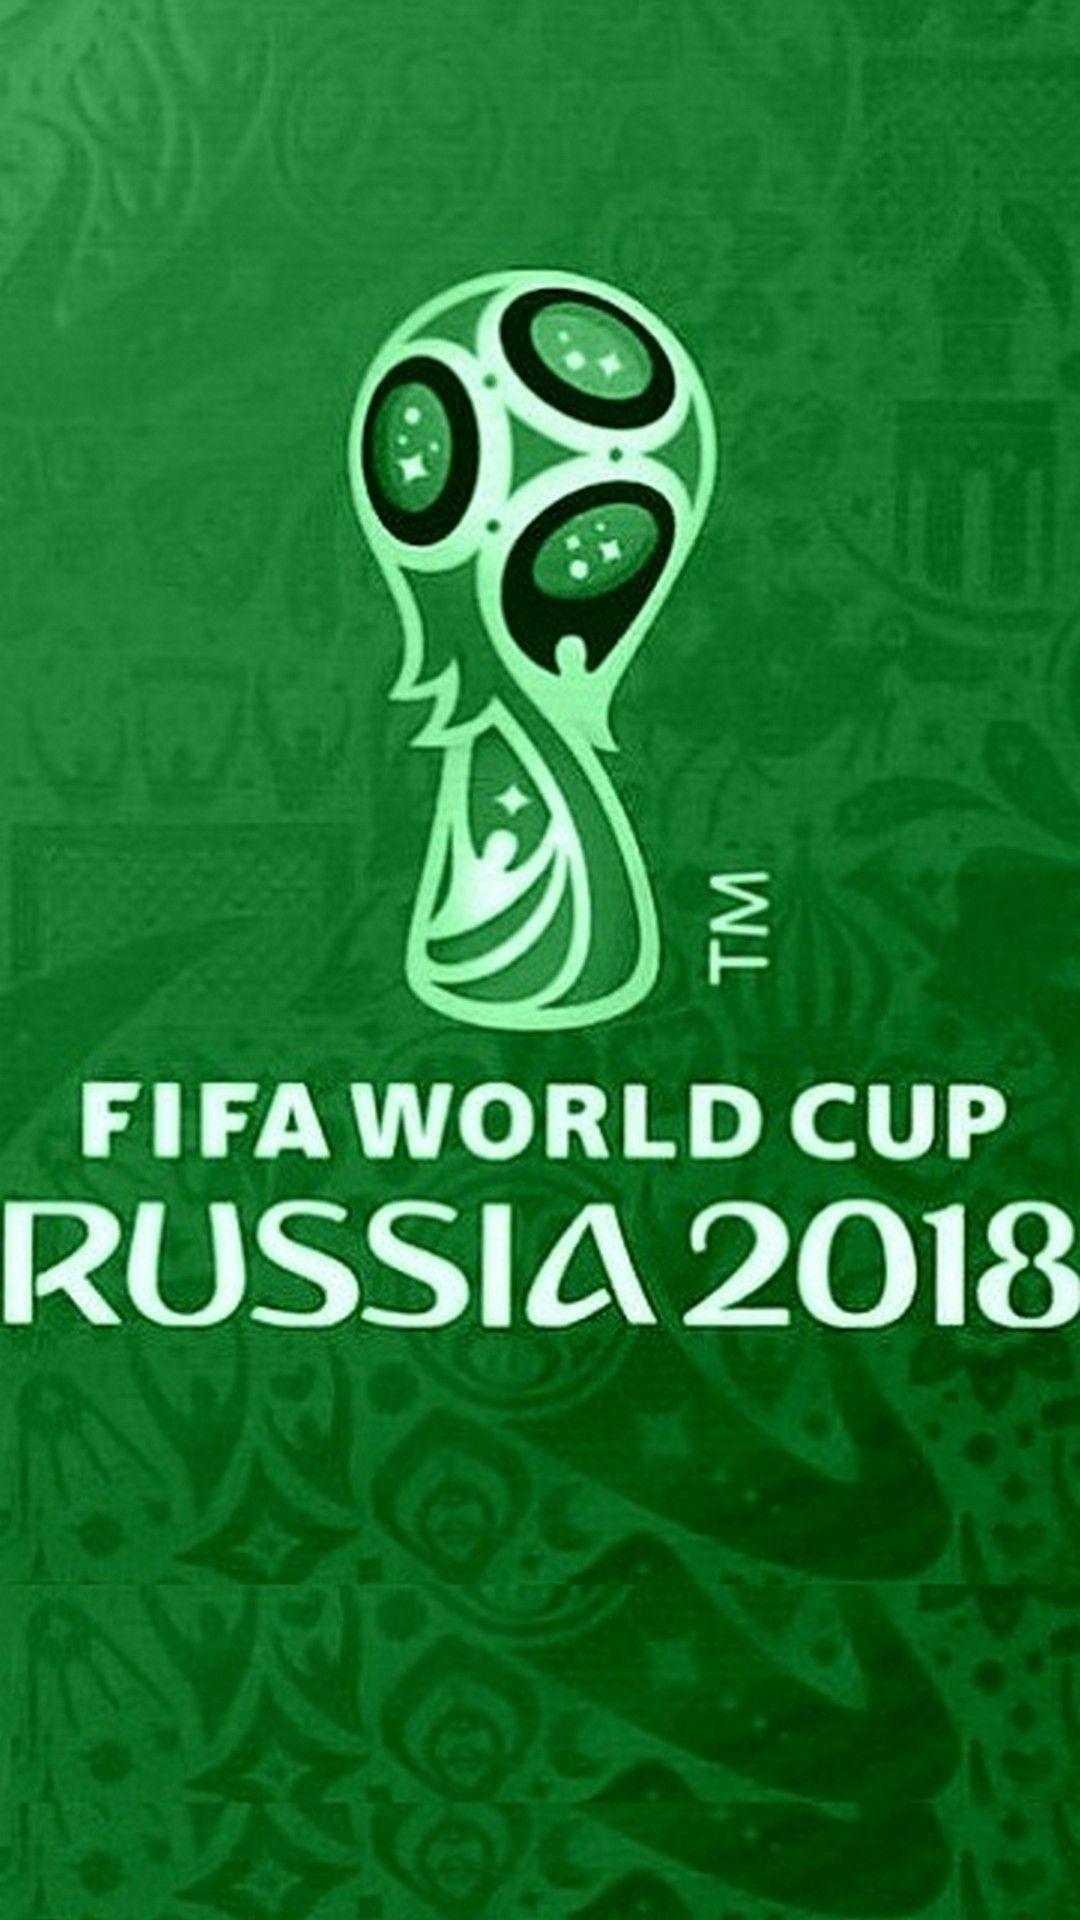 Android Wallpaper 2018 World Cup Android Wallpaper. World